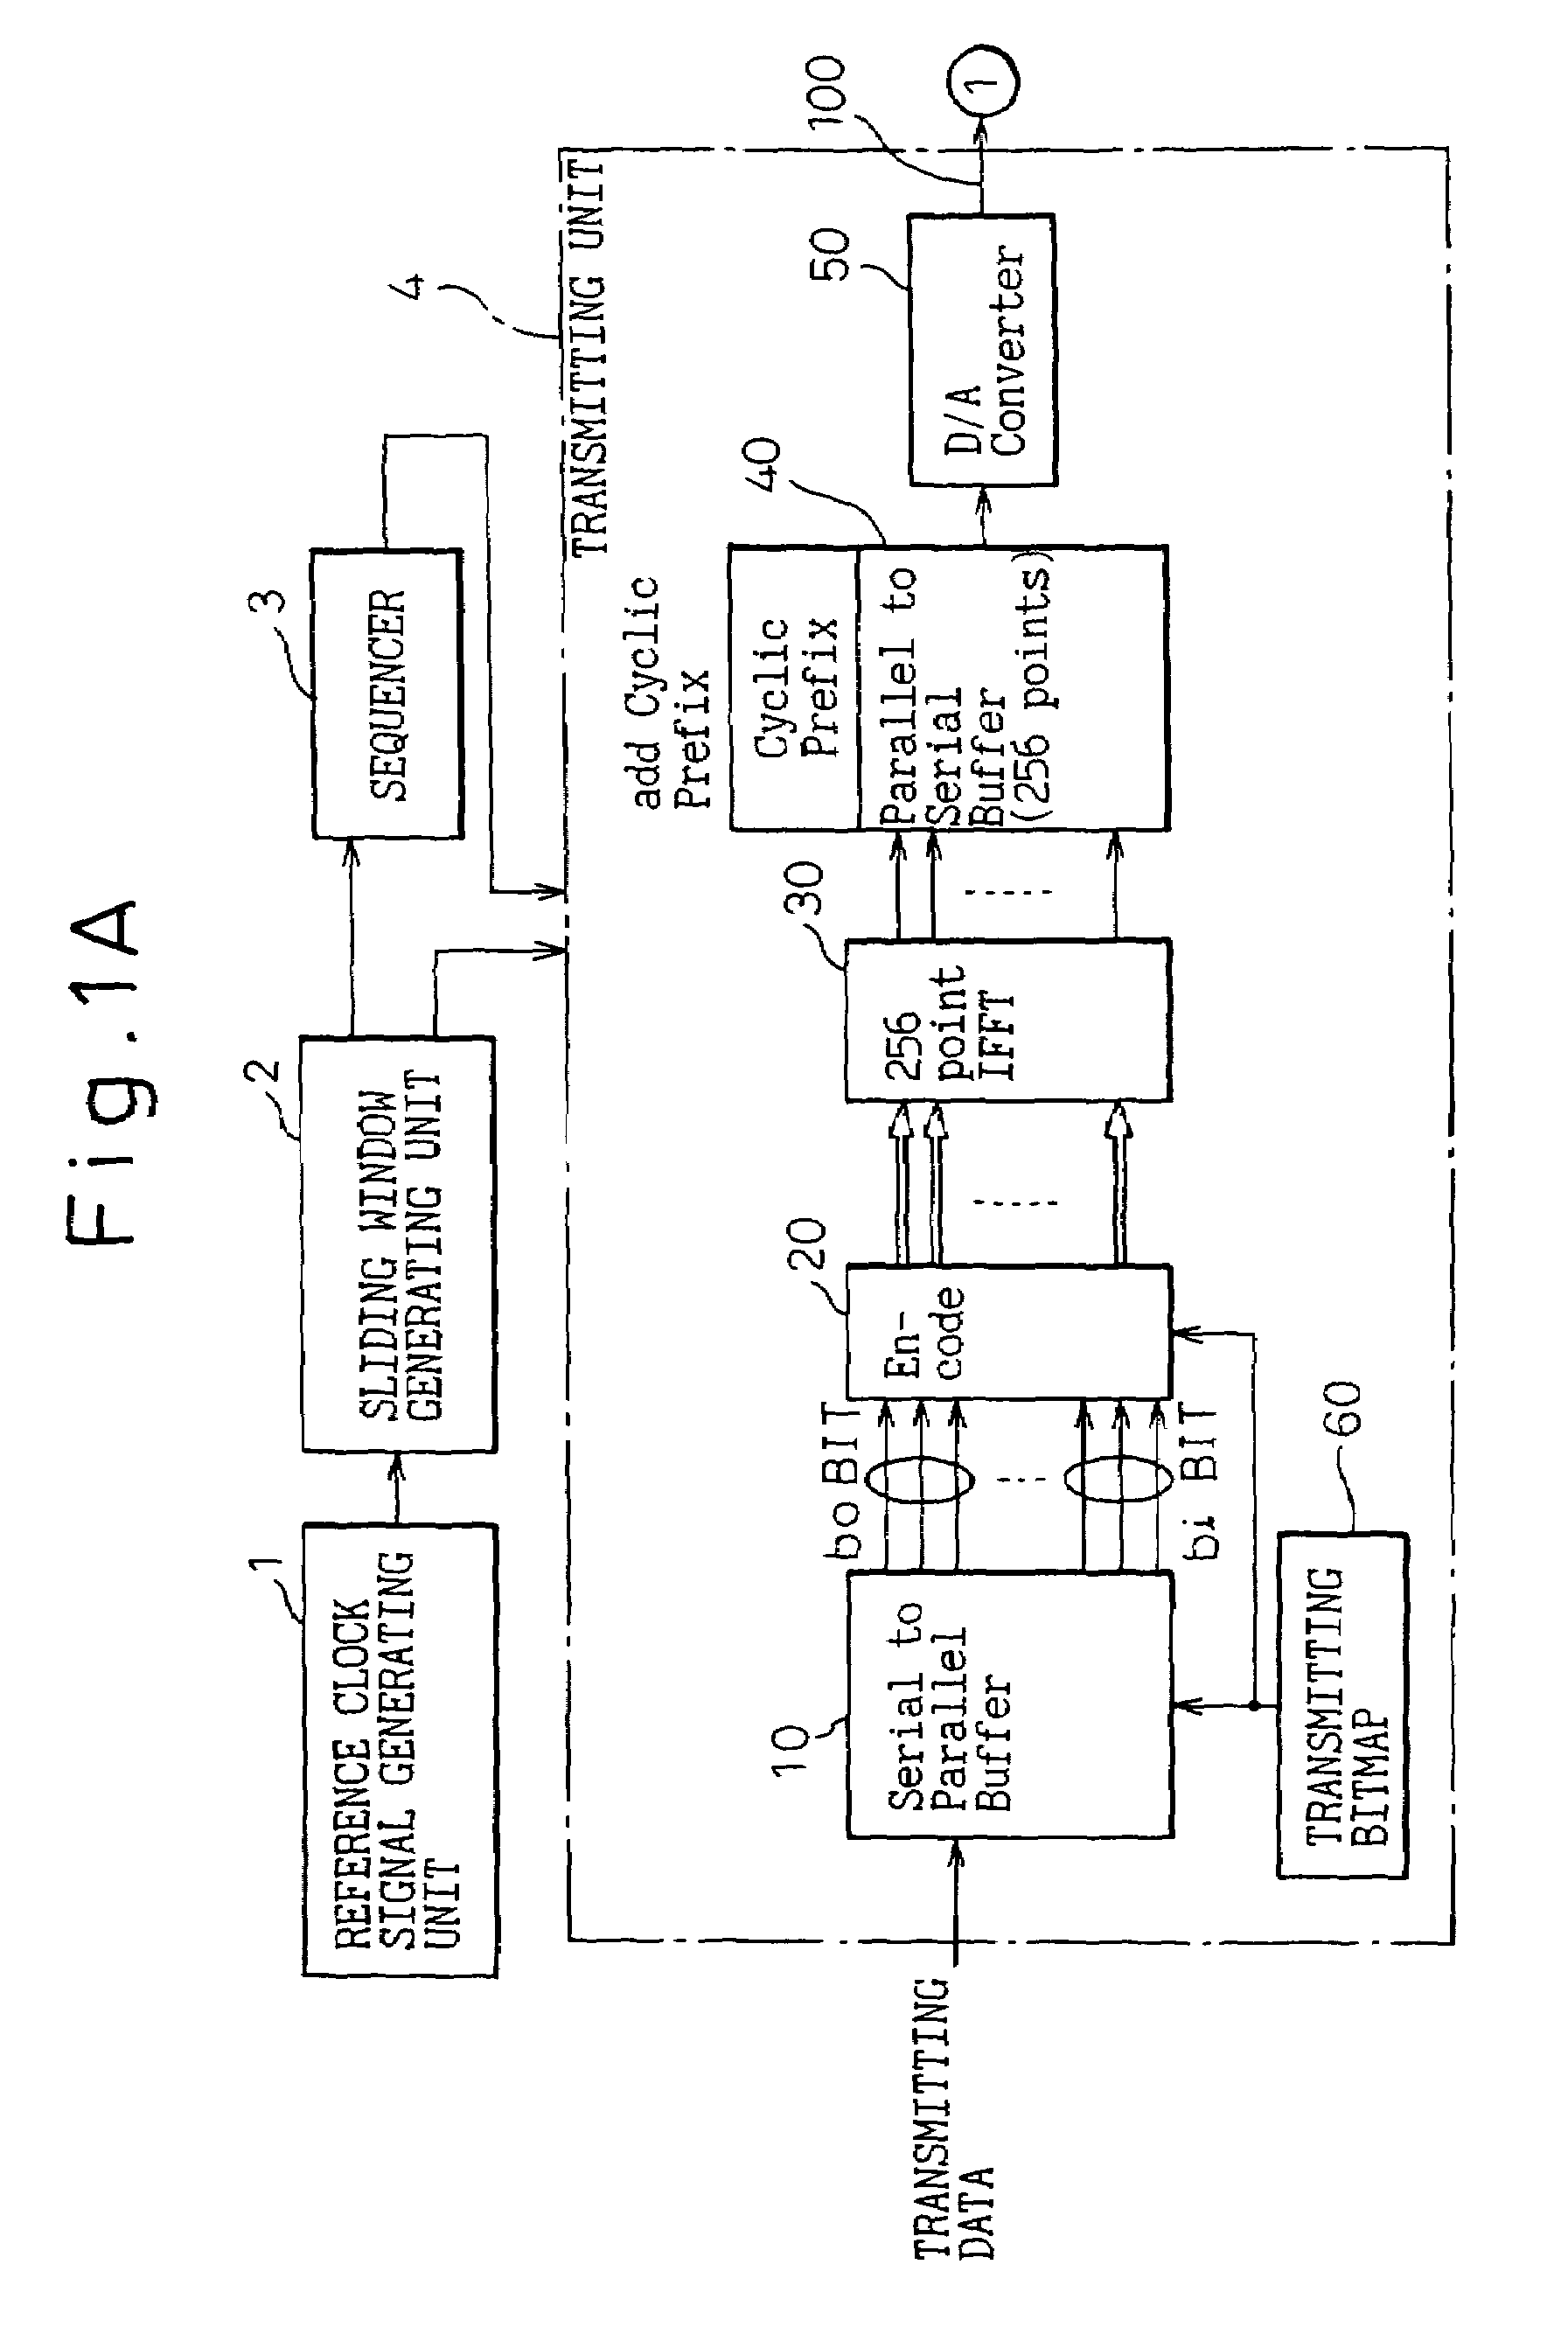 Digital subscriber line communicating system and a transceiver in the system